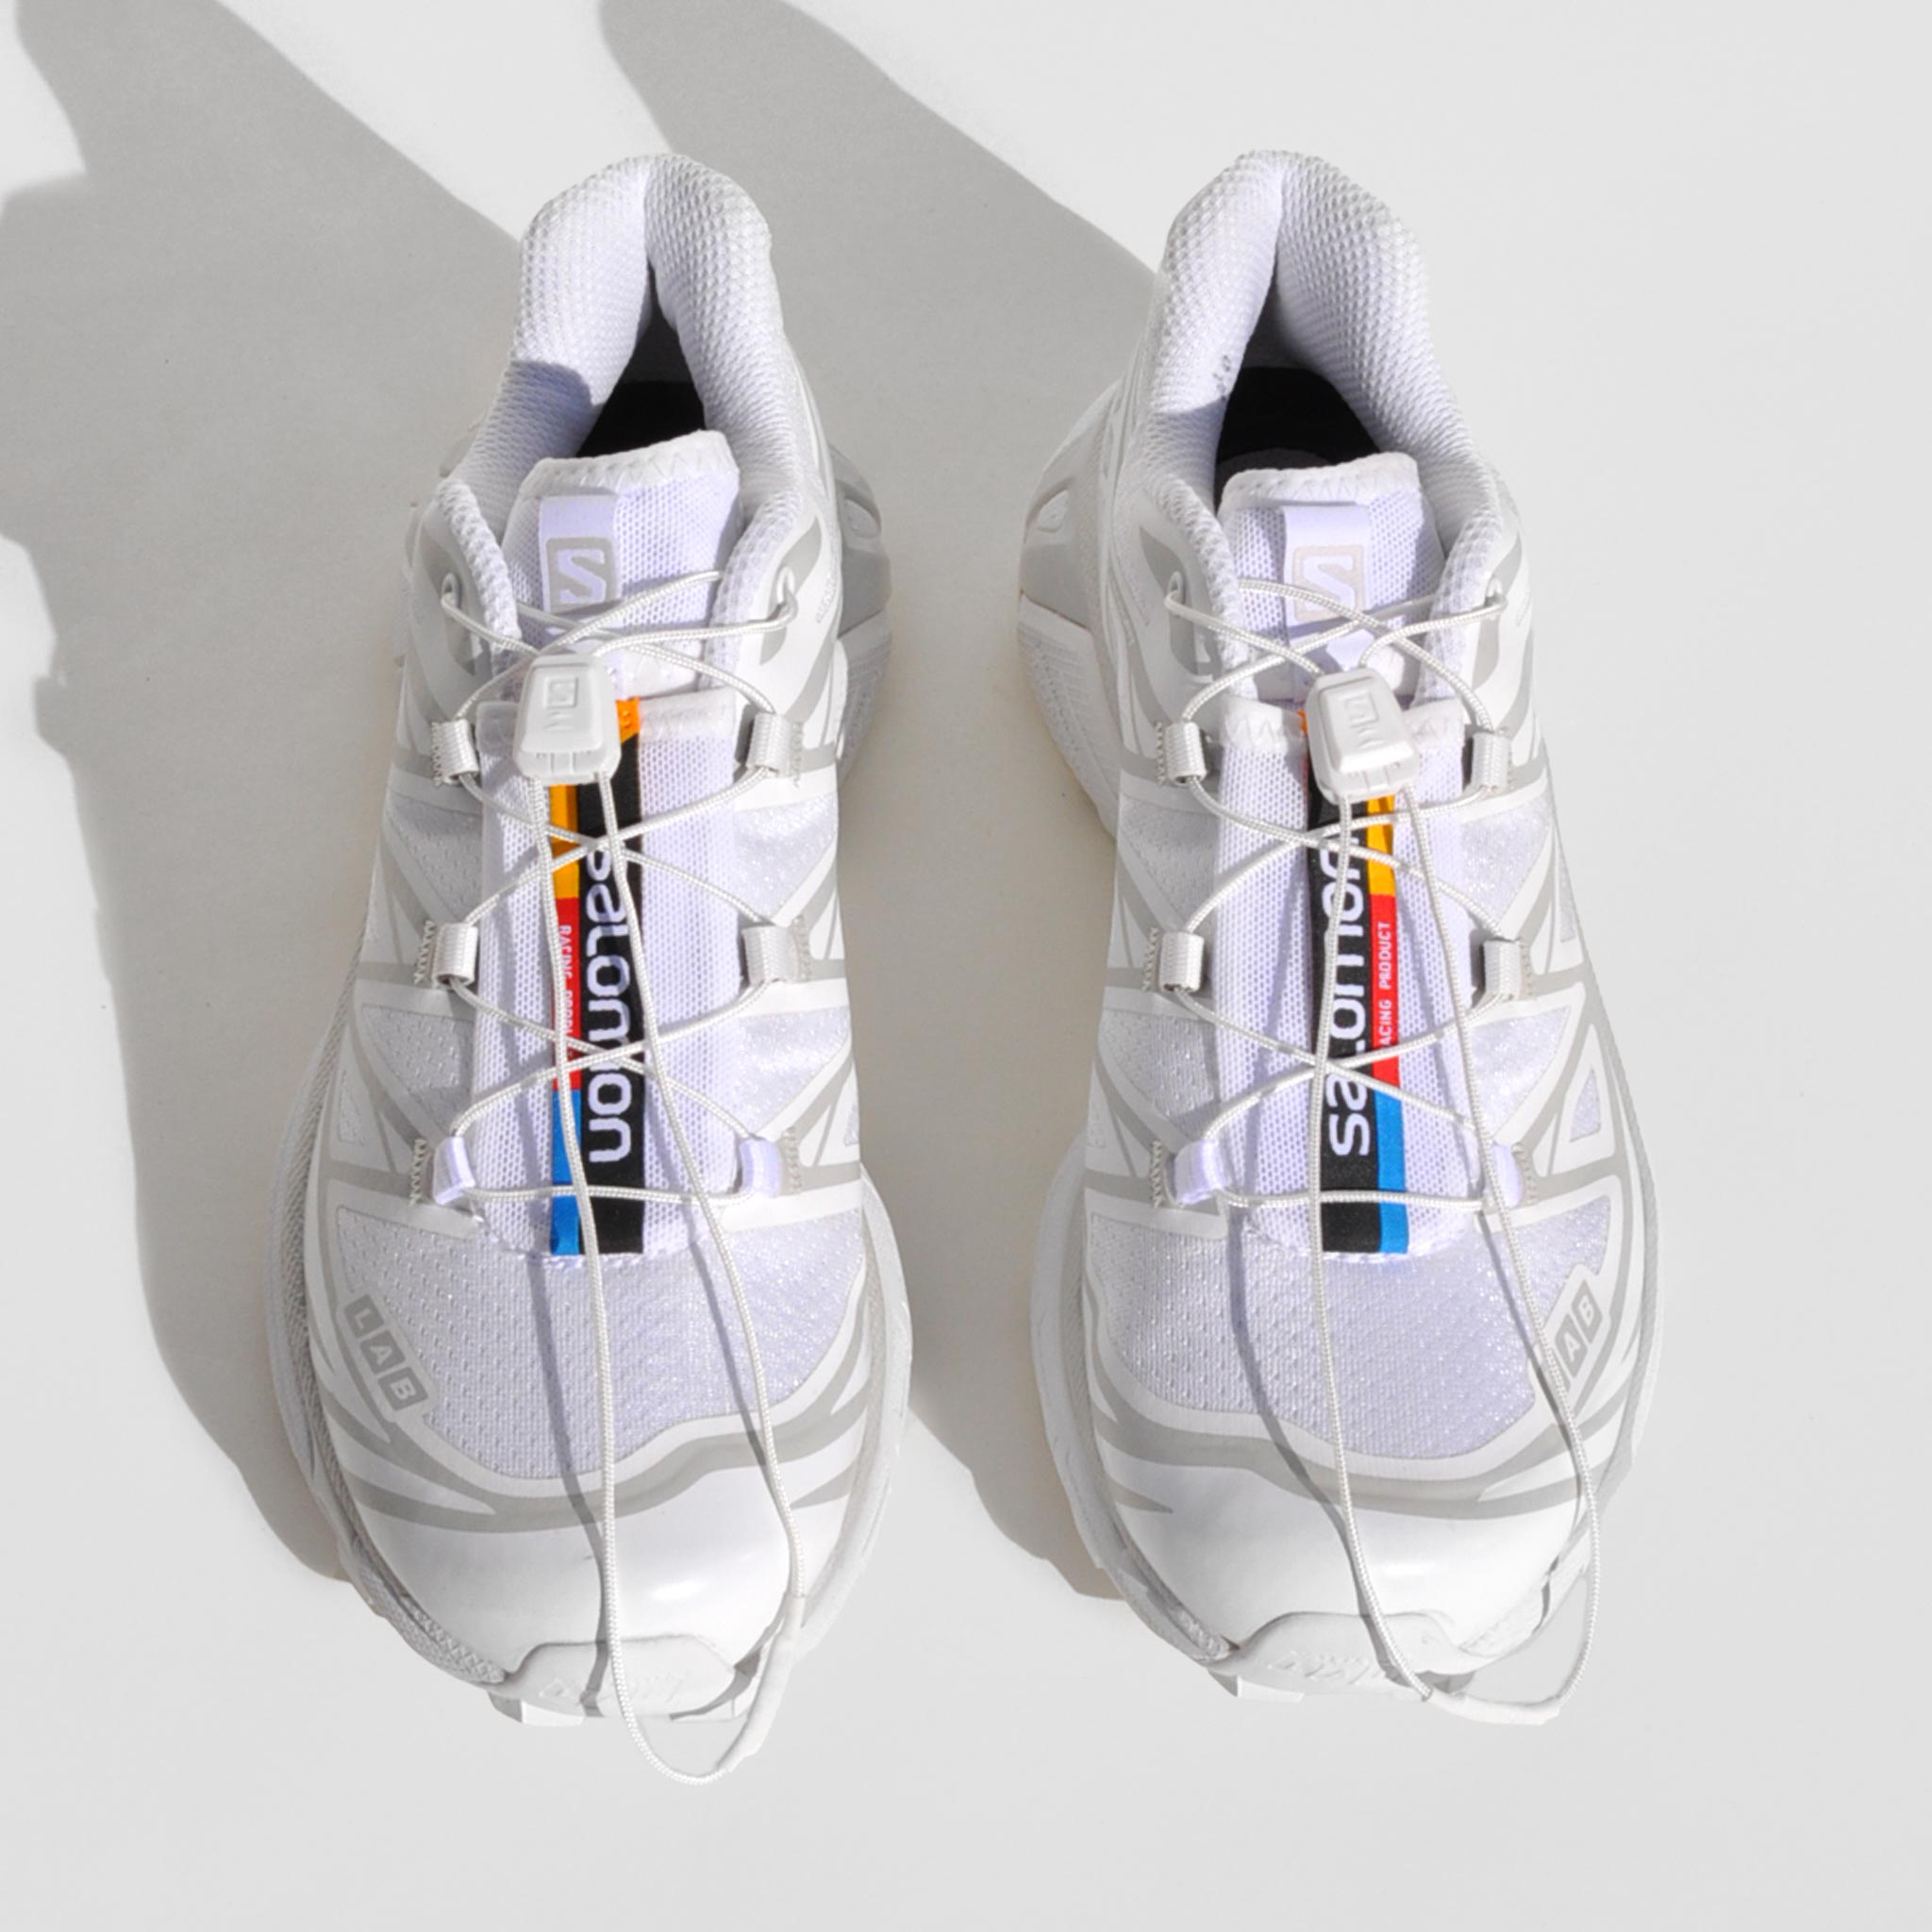 Above image of the XT-6-white sneakers by Salmon sport style in white. These sneakers are white with their rainbow logo down the middle tongue.